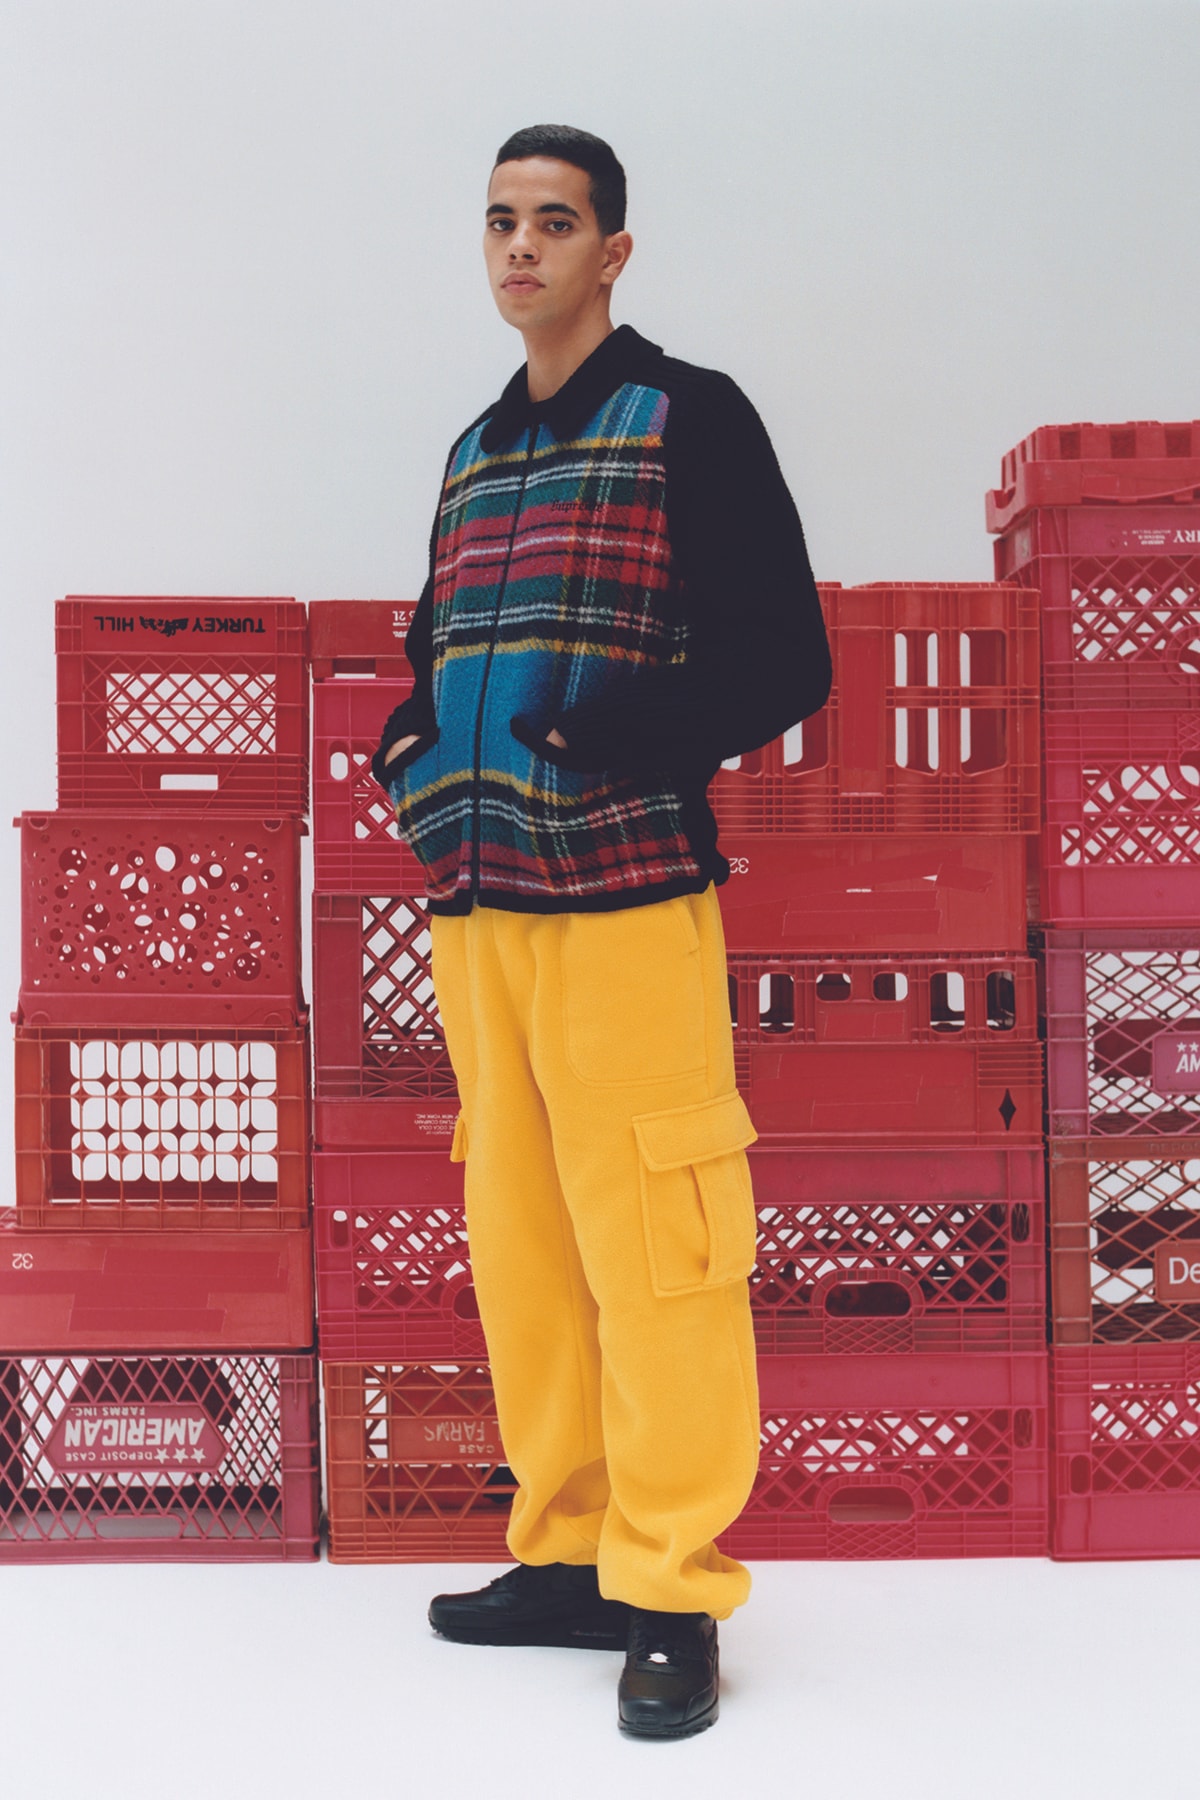 Supreme Fall/Winter 2018 Editorial Shoot Plaid Sweater Yellow Pants Crates